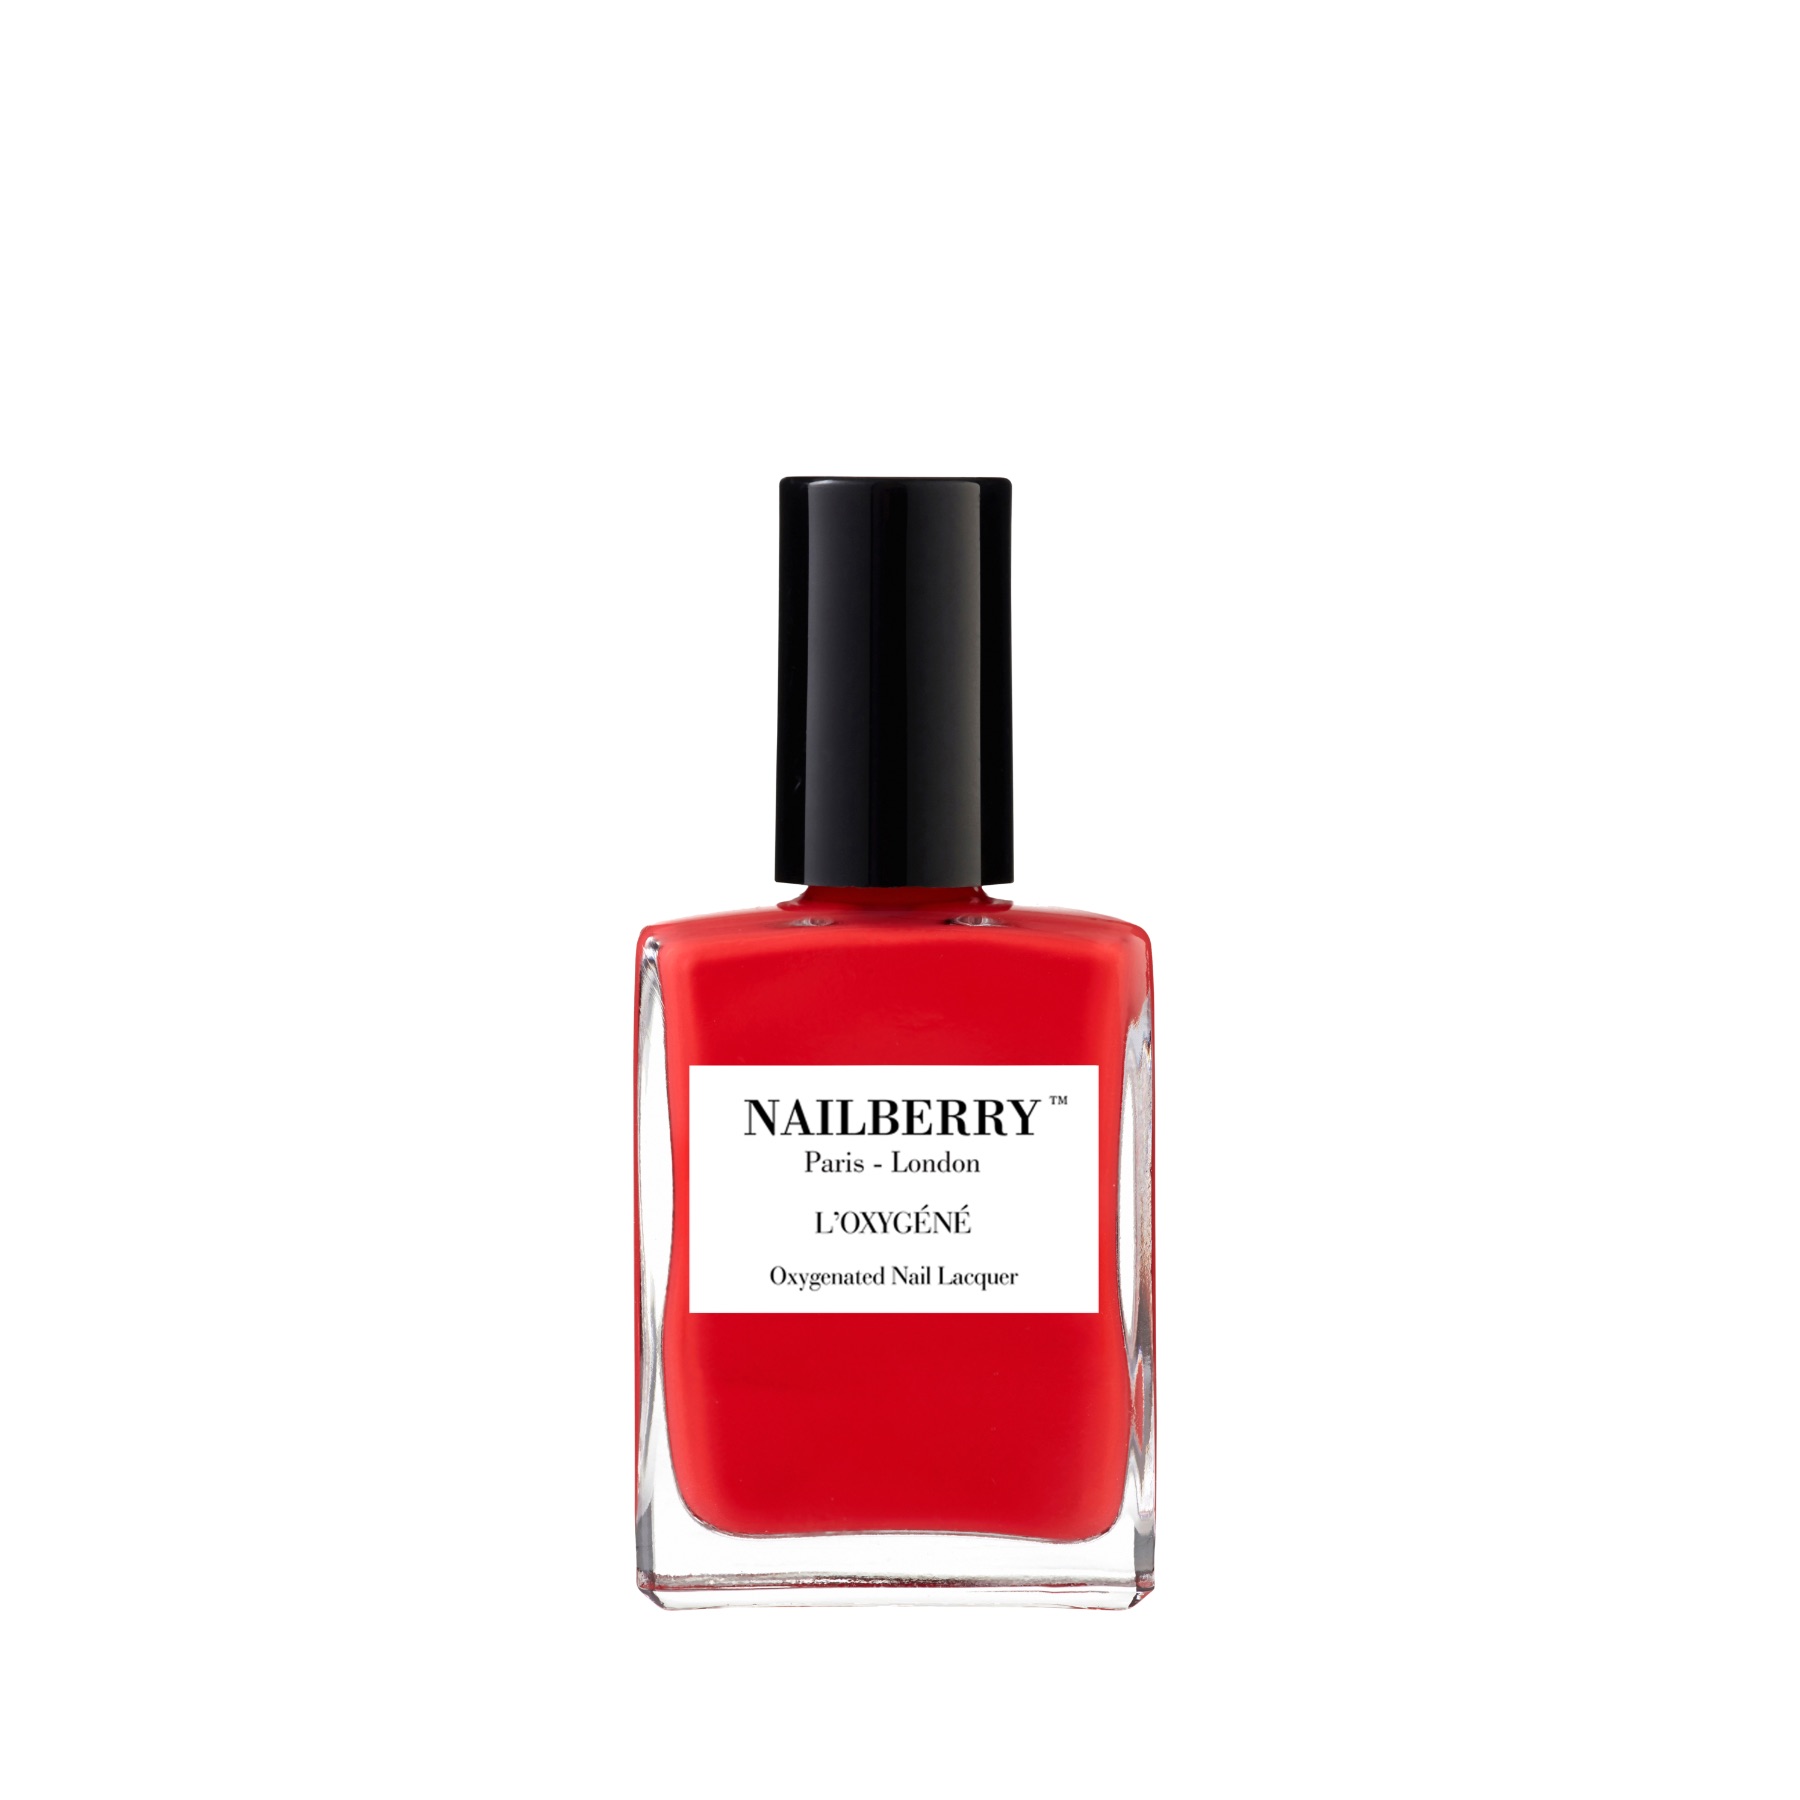 NAILBERRY Pop my berry 15 ml primary